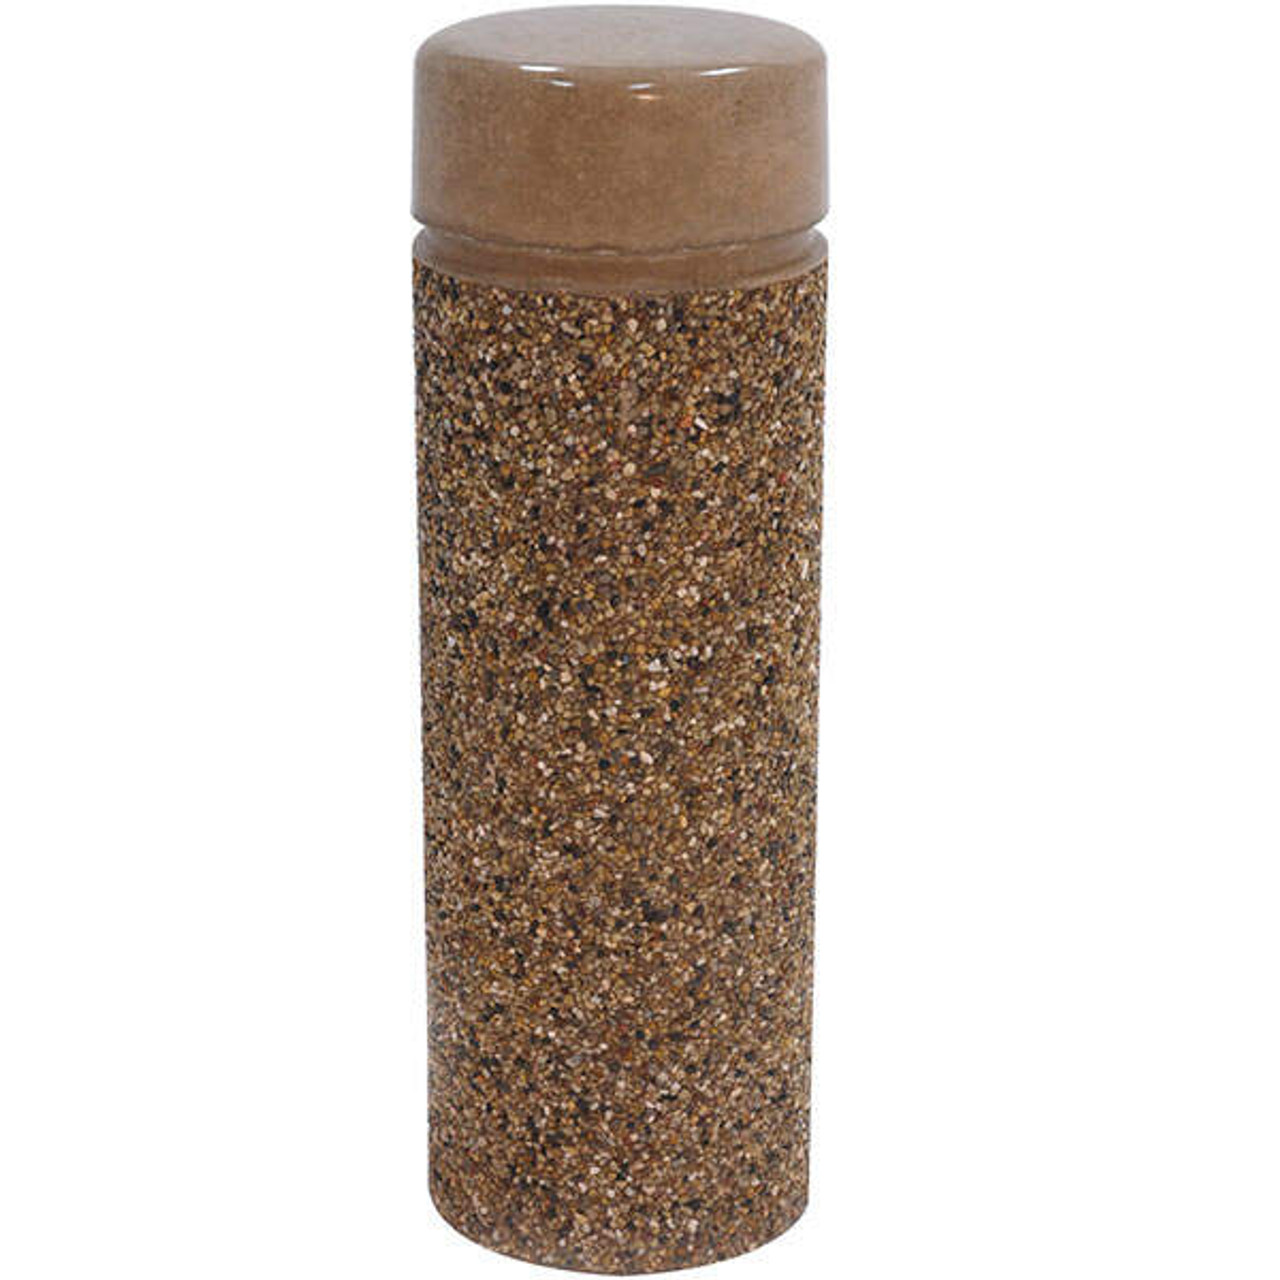 Concrete Bollard Safety Barrier 12 x 36 TF6020 Exposed Aggregate